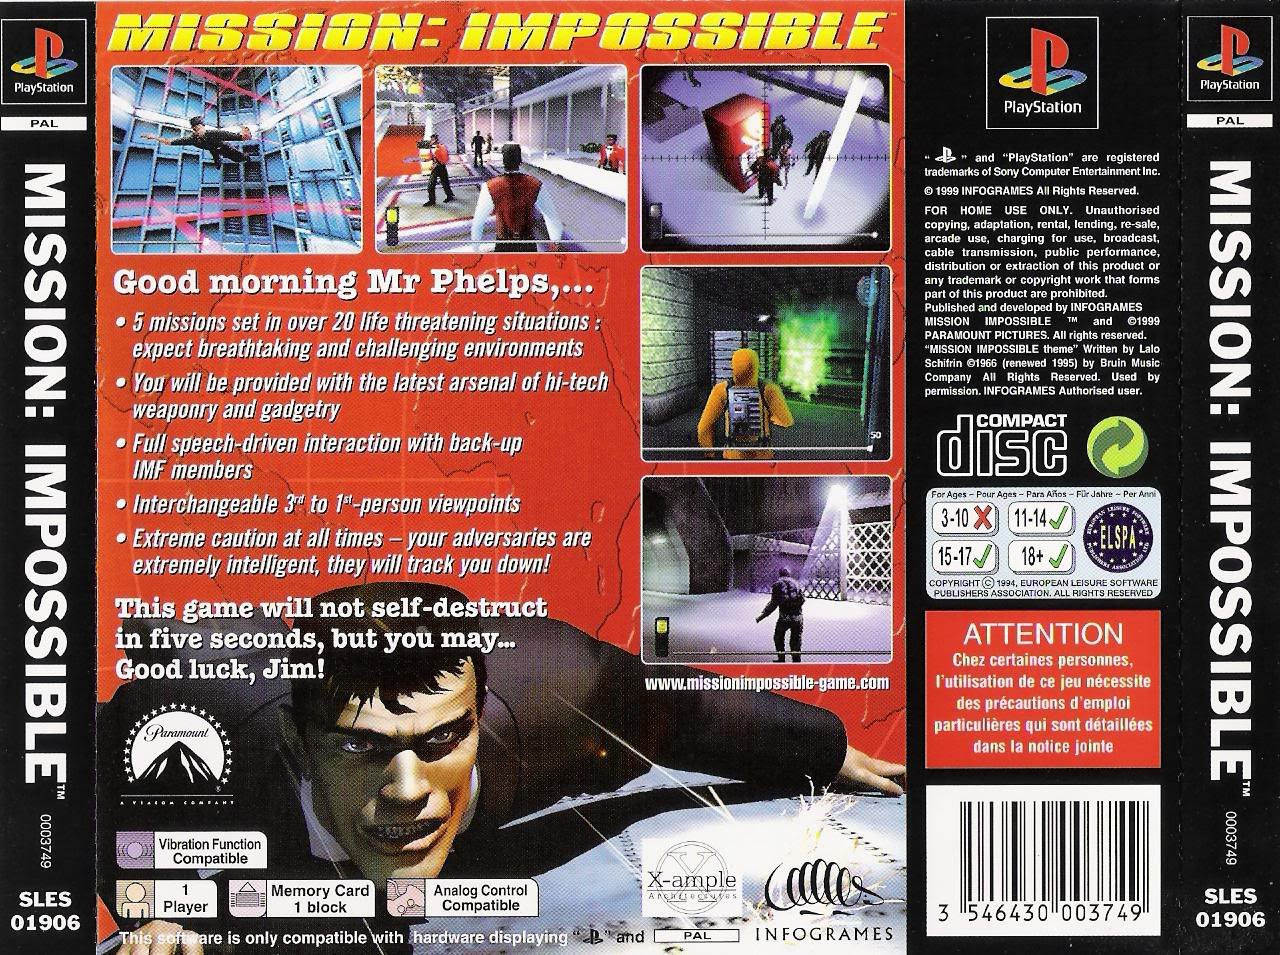 MISSION IMPOSSIBLE (PAL) - BACK